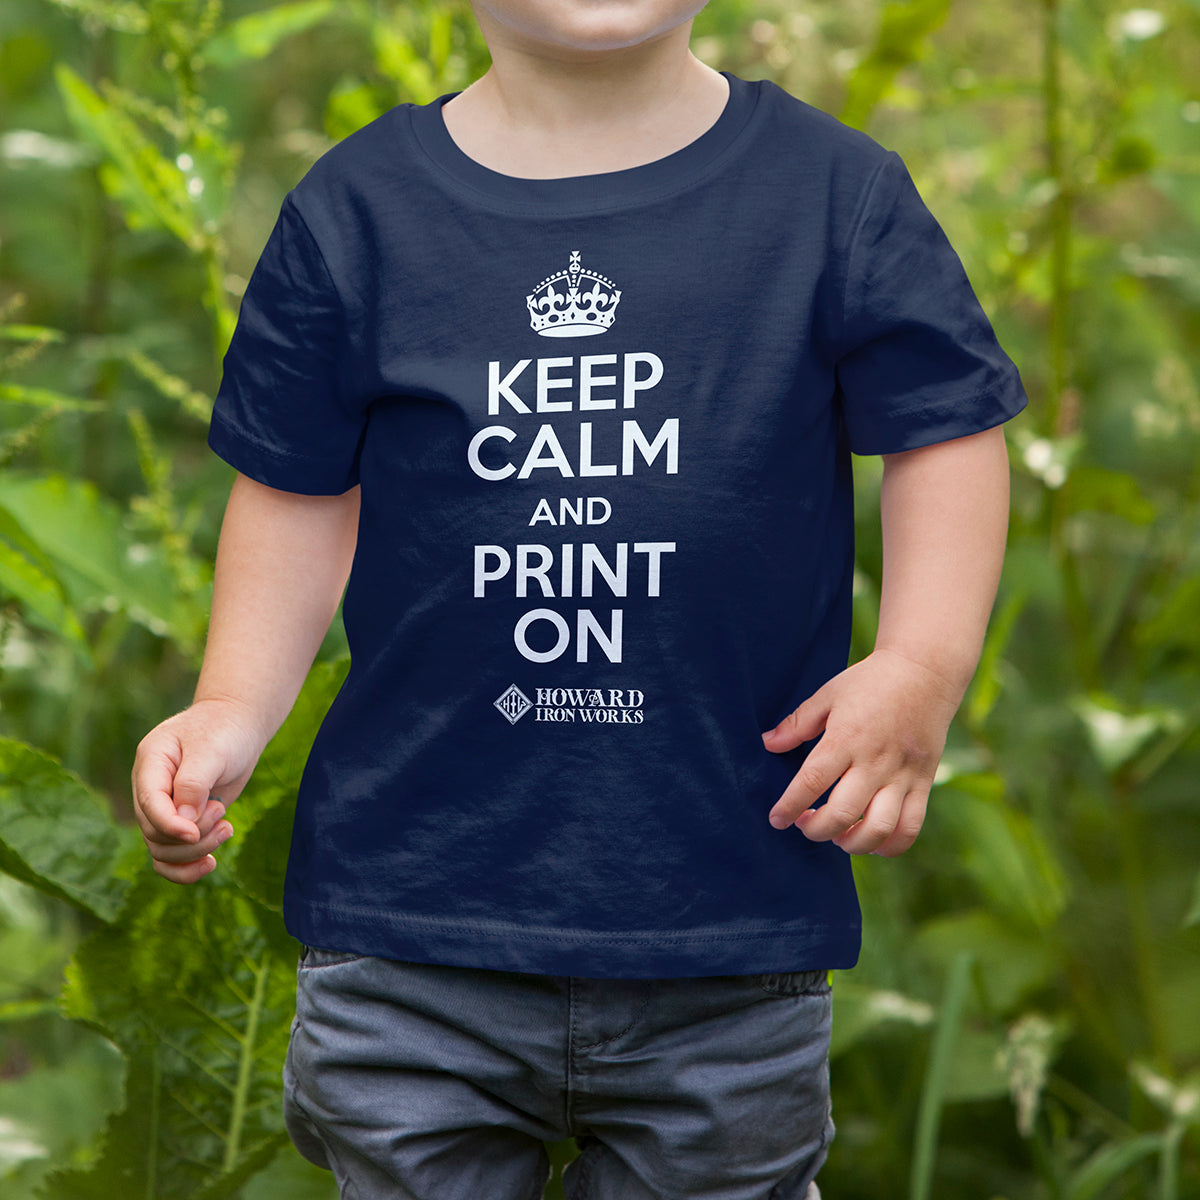 Toddler T-shirt, Keep Calm, Navy - from Howard Iron Works Printing Museum